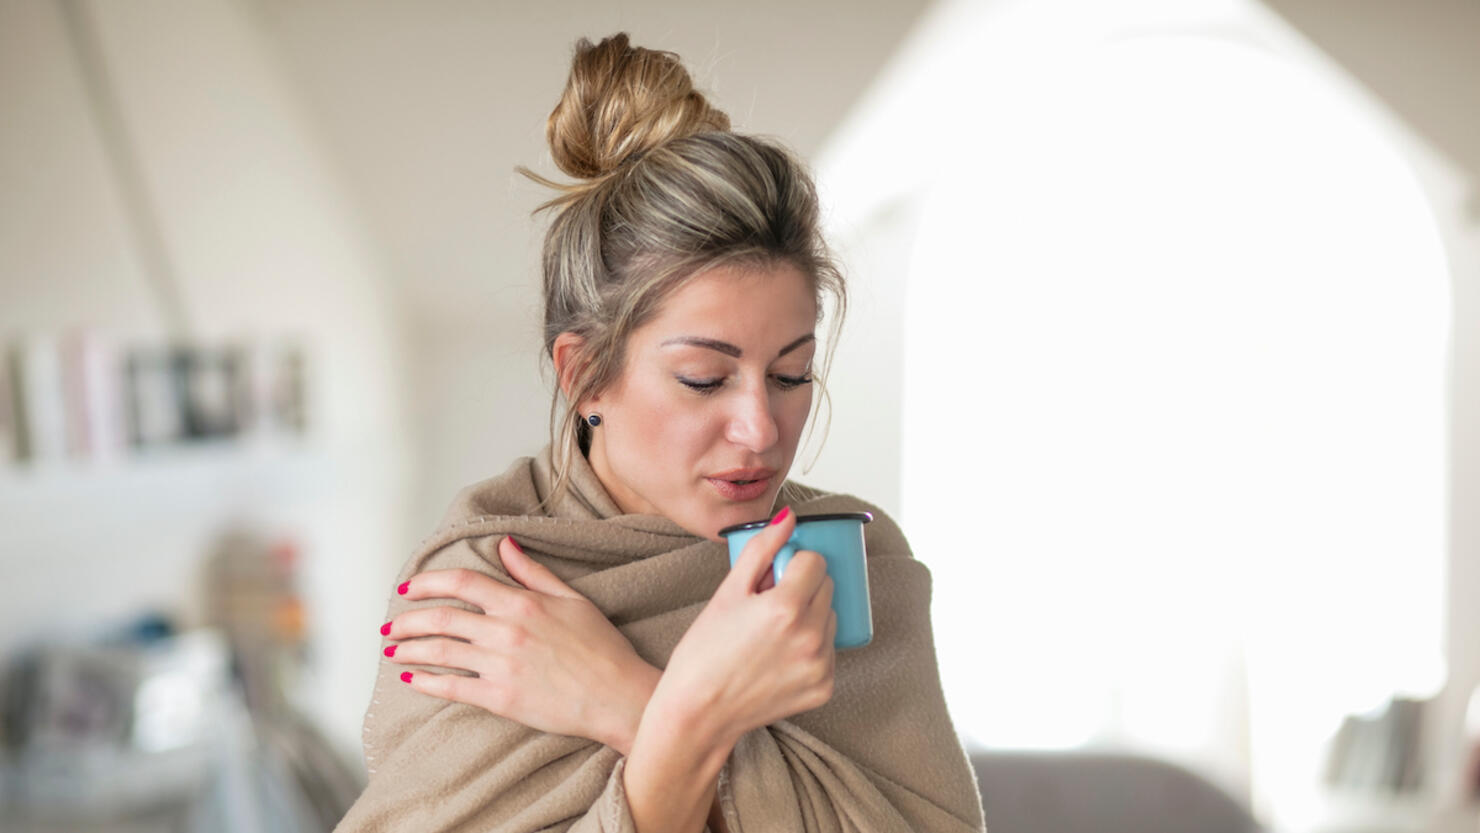 Woman Wrapped Having Drink While Standing At Home